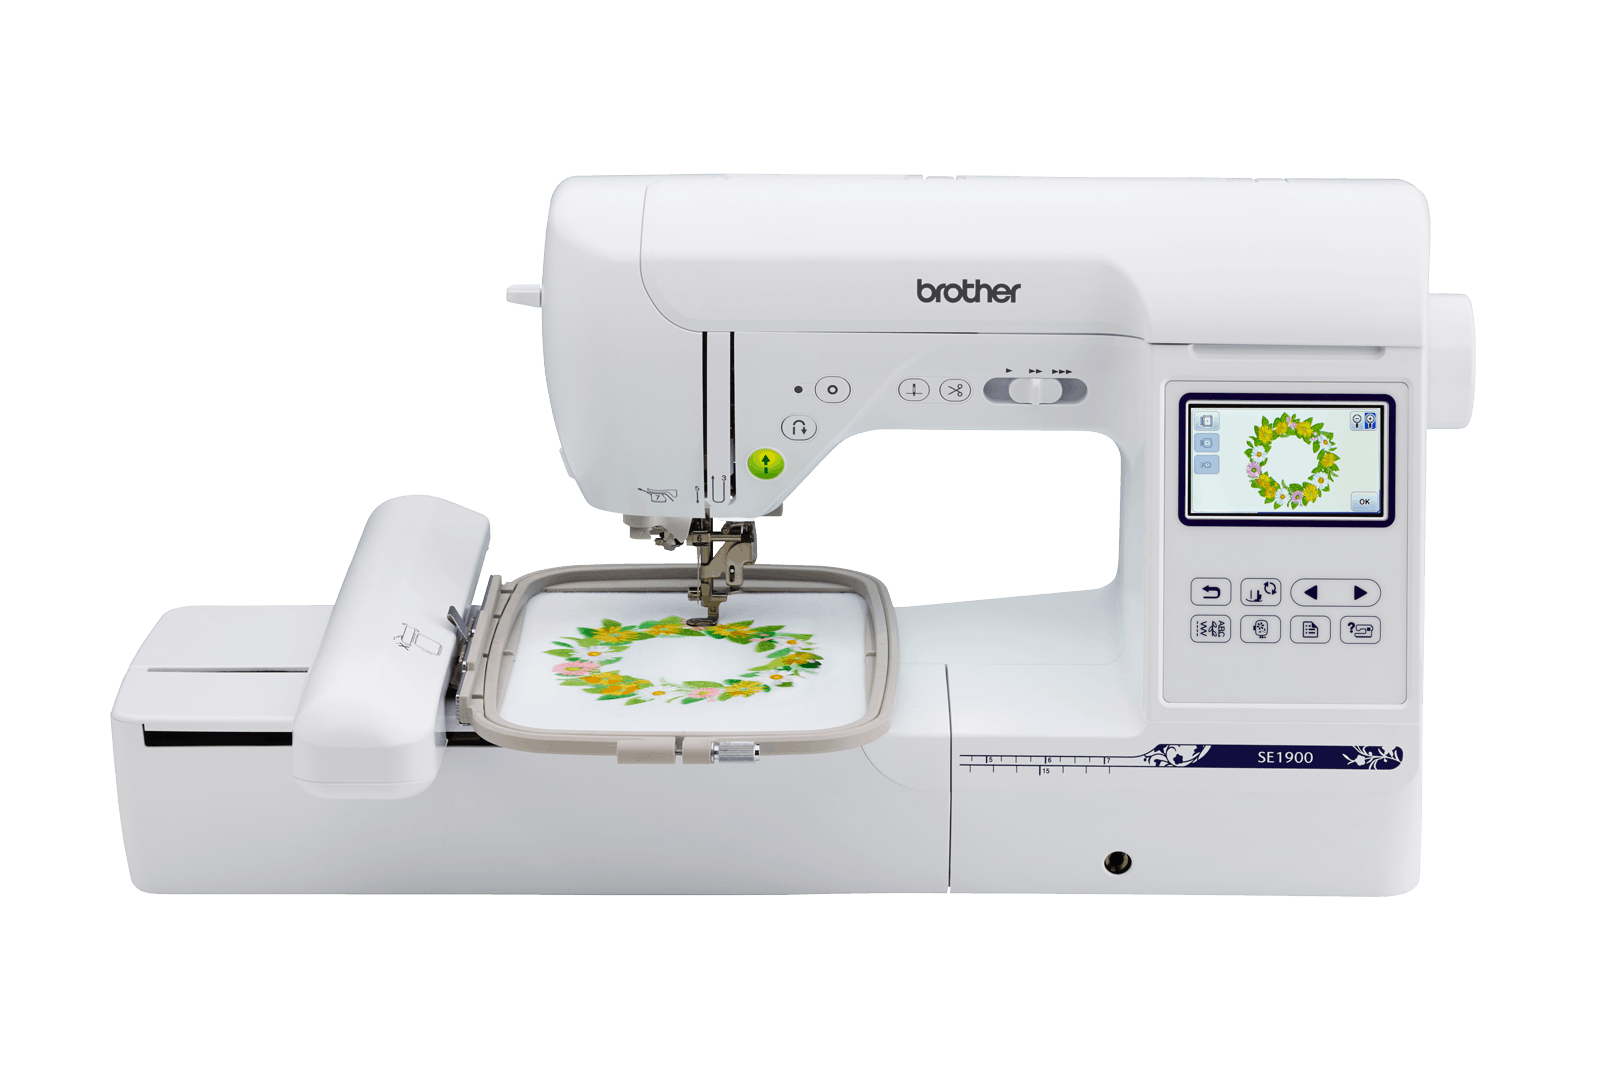 is brother pe design 10 software compatible with a baby